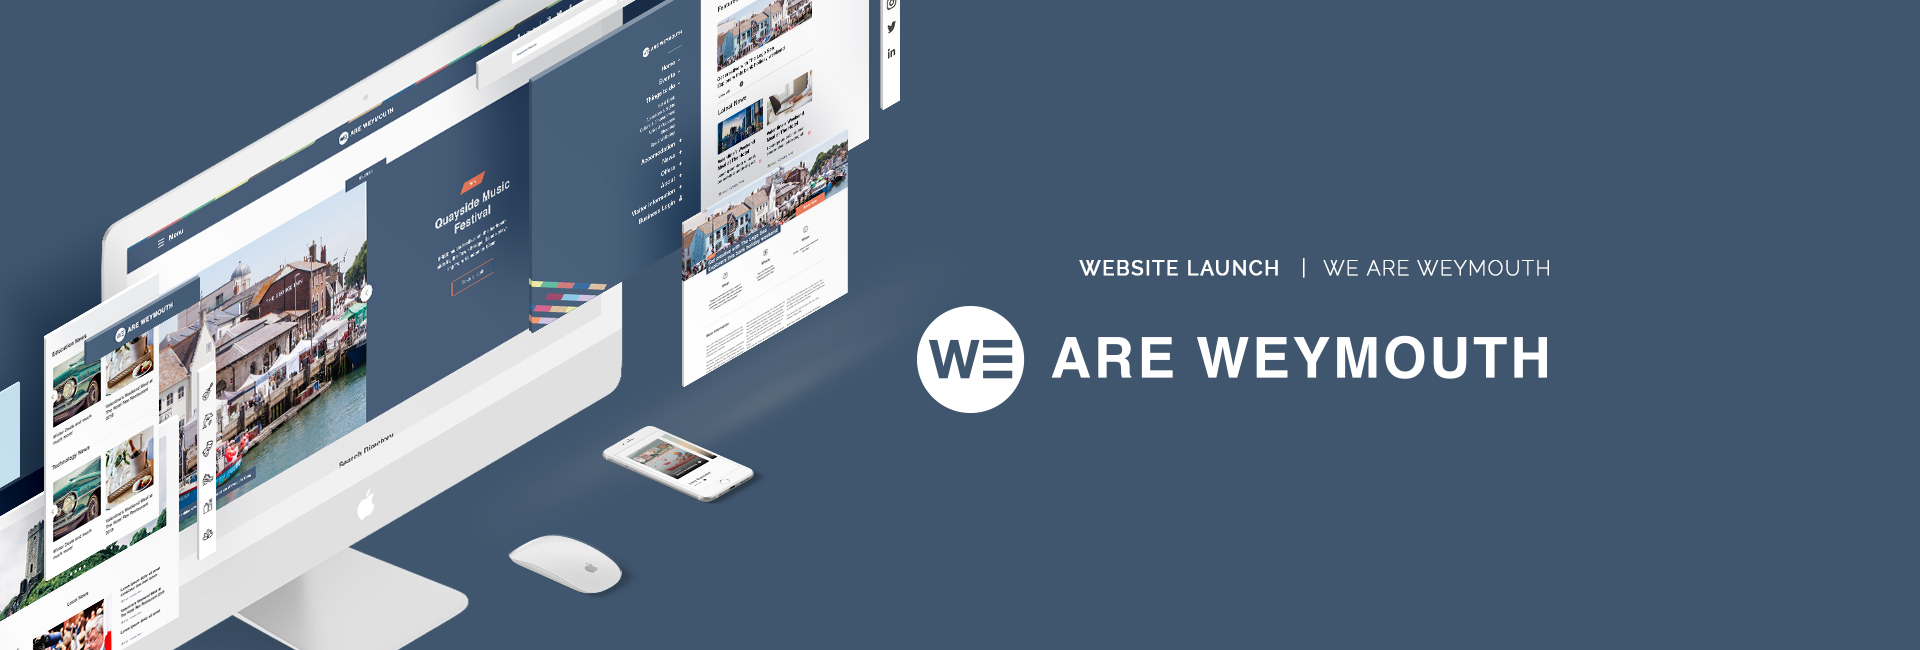 Digital Storm launch the brand new We are Weymouth tourist information website.